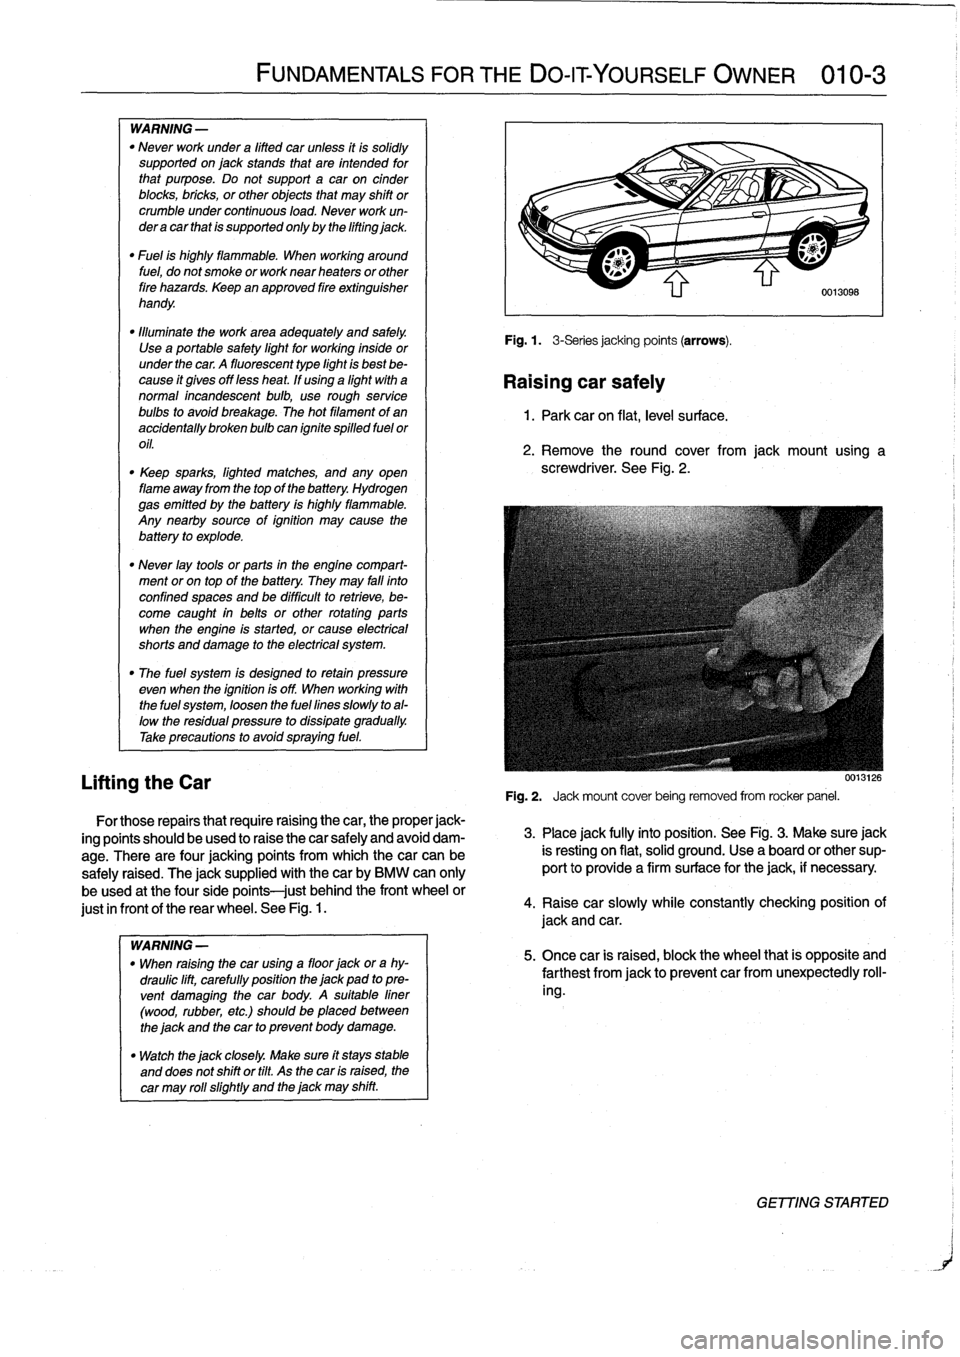 BMW 323i 1993 E36 Workshop Manual 
WARNING
-

"
Never
work
under
a
lifted
car
unless
it
is
solidly
supported
on
jack
stands
that
are
intended
for
that
purpose
.
Do
not
support
a
car
on
cinder
blocks,
bricks,
or
other
objects
that
may
